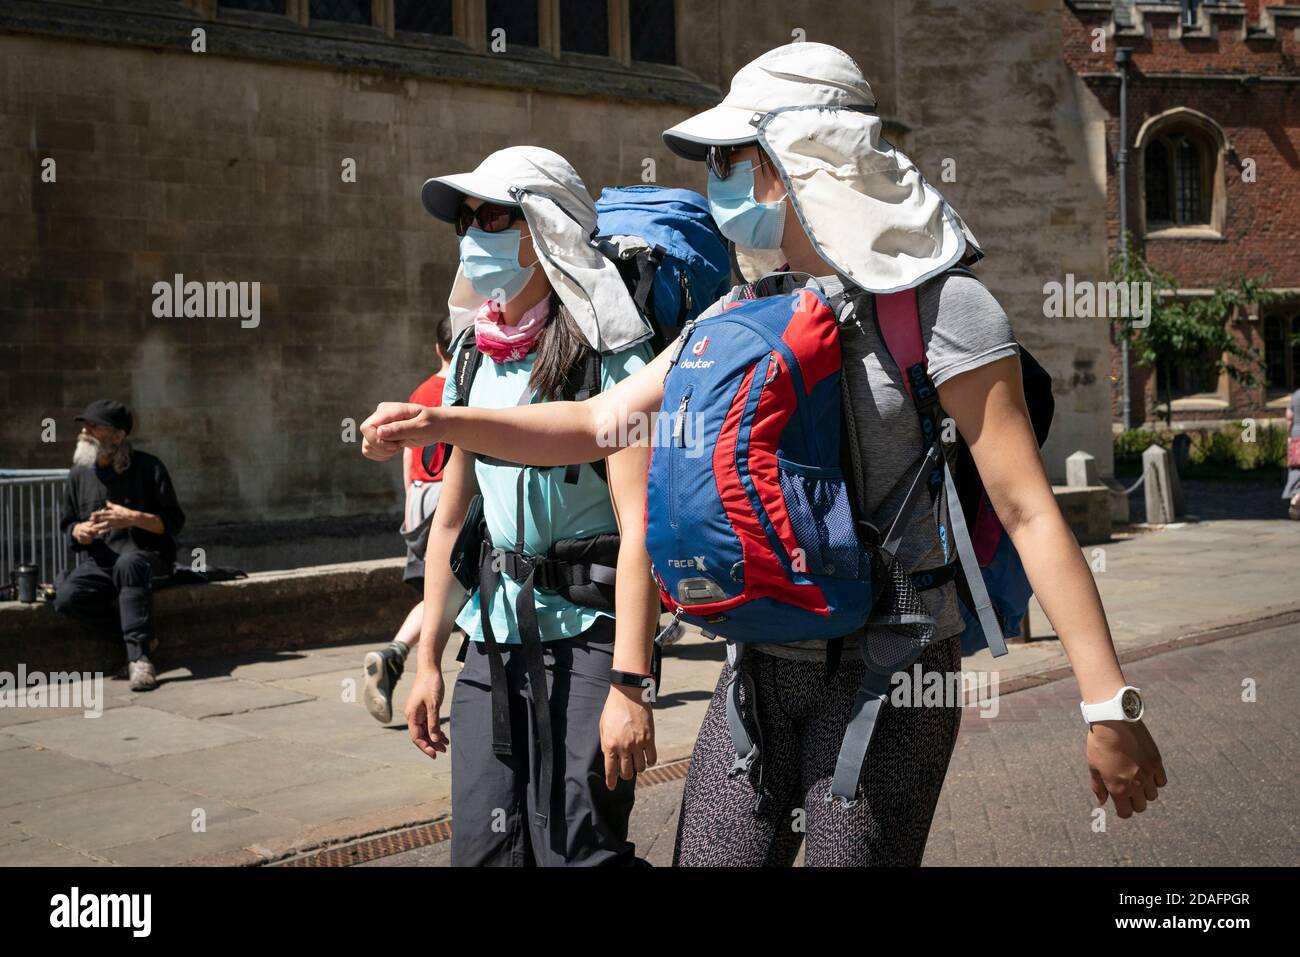 Two tourists dressed in Legionairre's hats and face masks, walk through Cambridge city centre during the 2020 COVID 19 pandemic Stock Photo